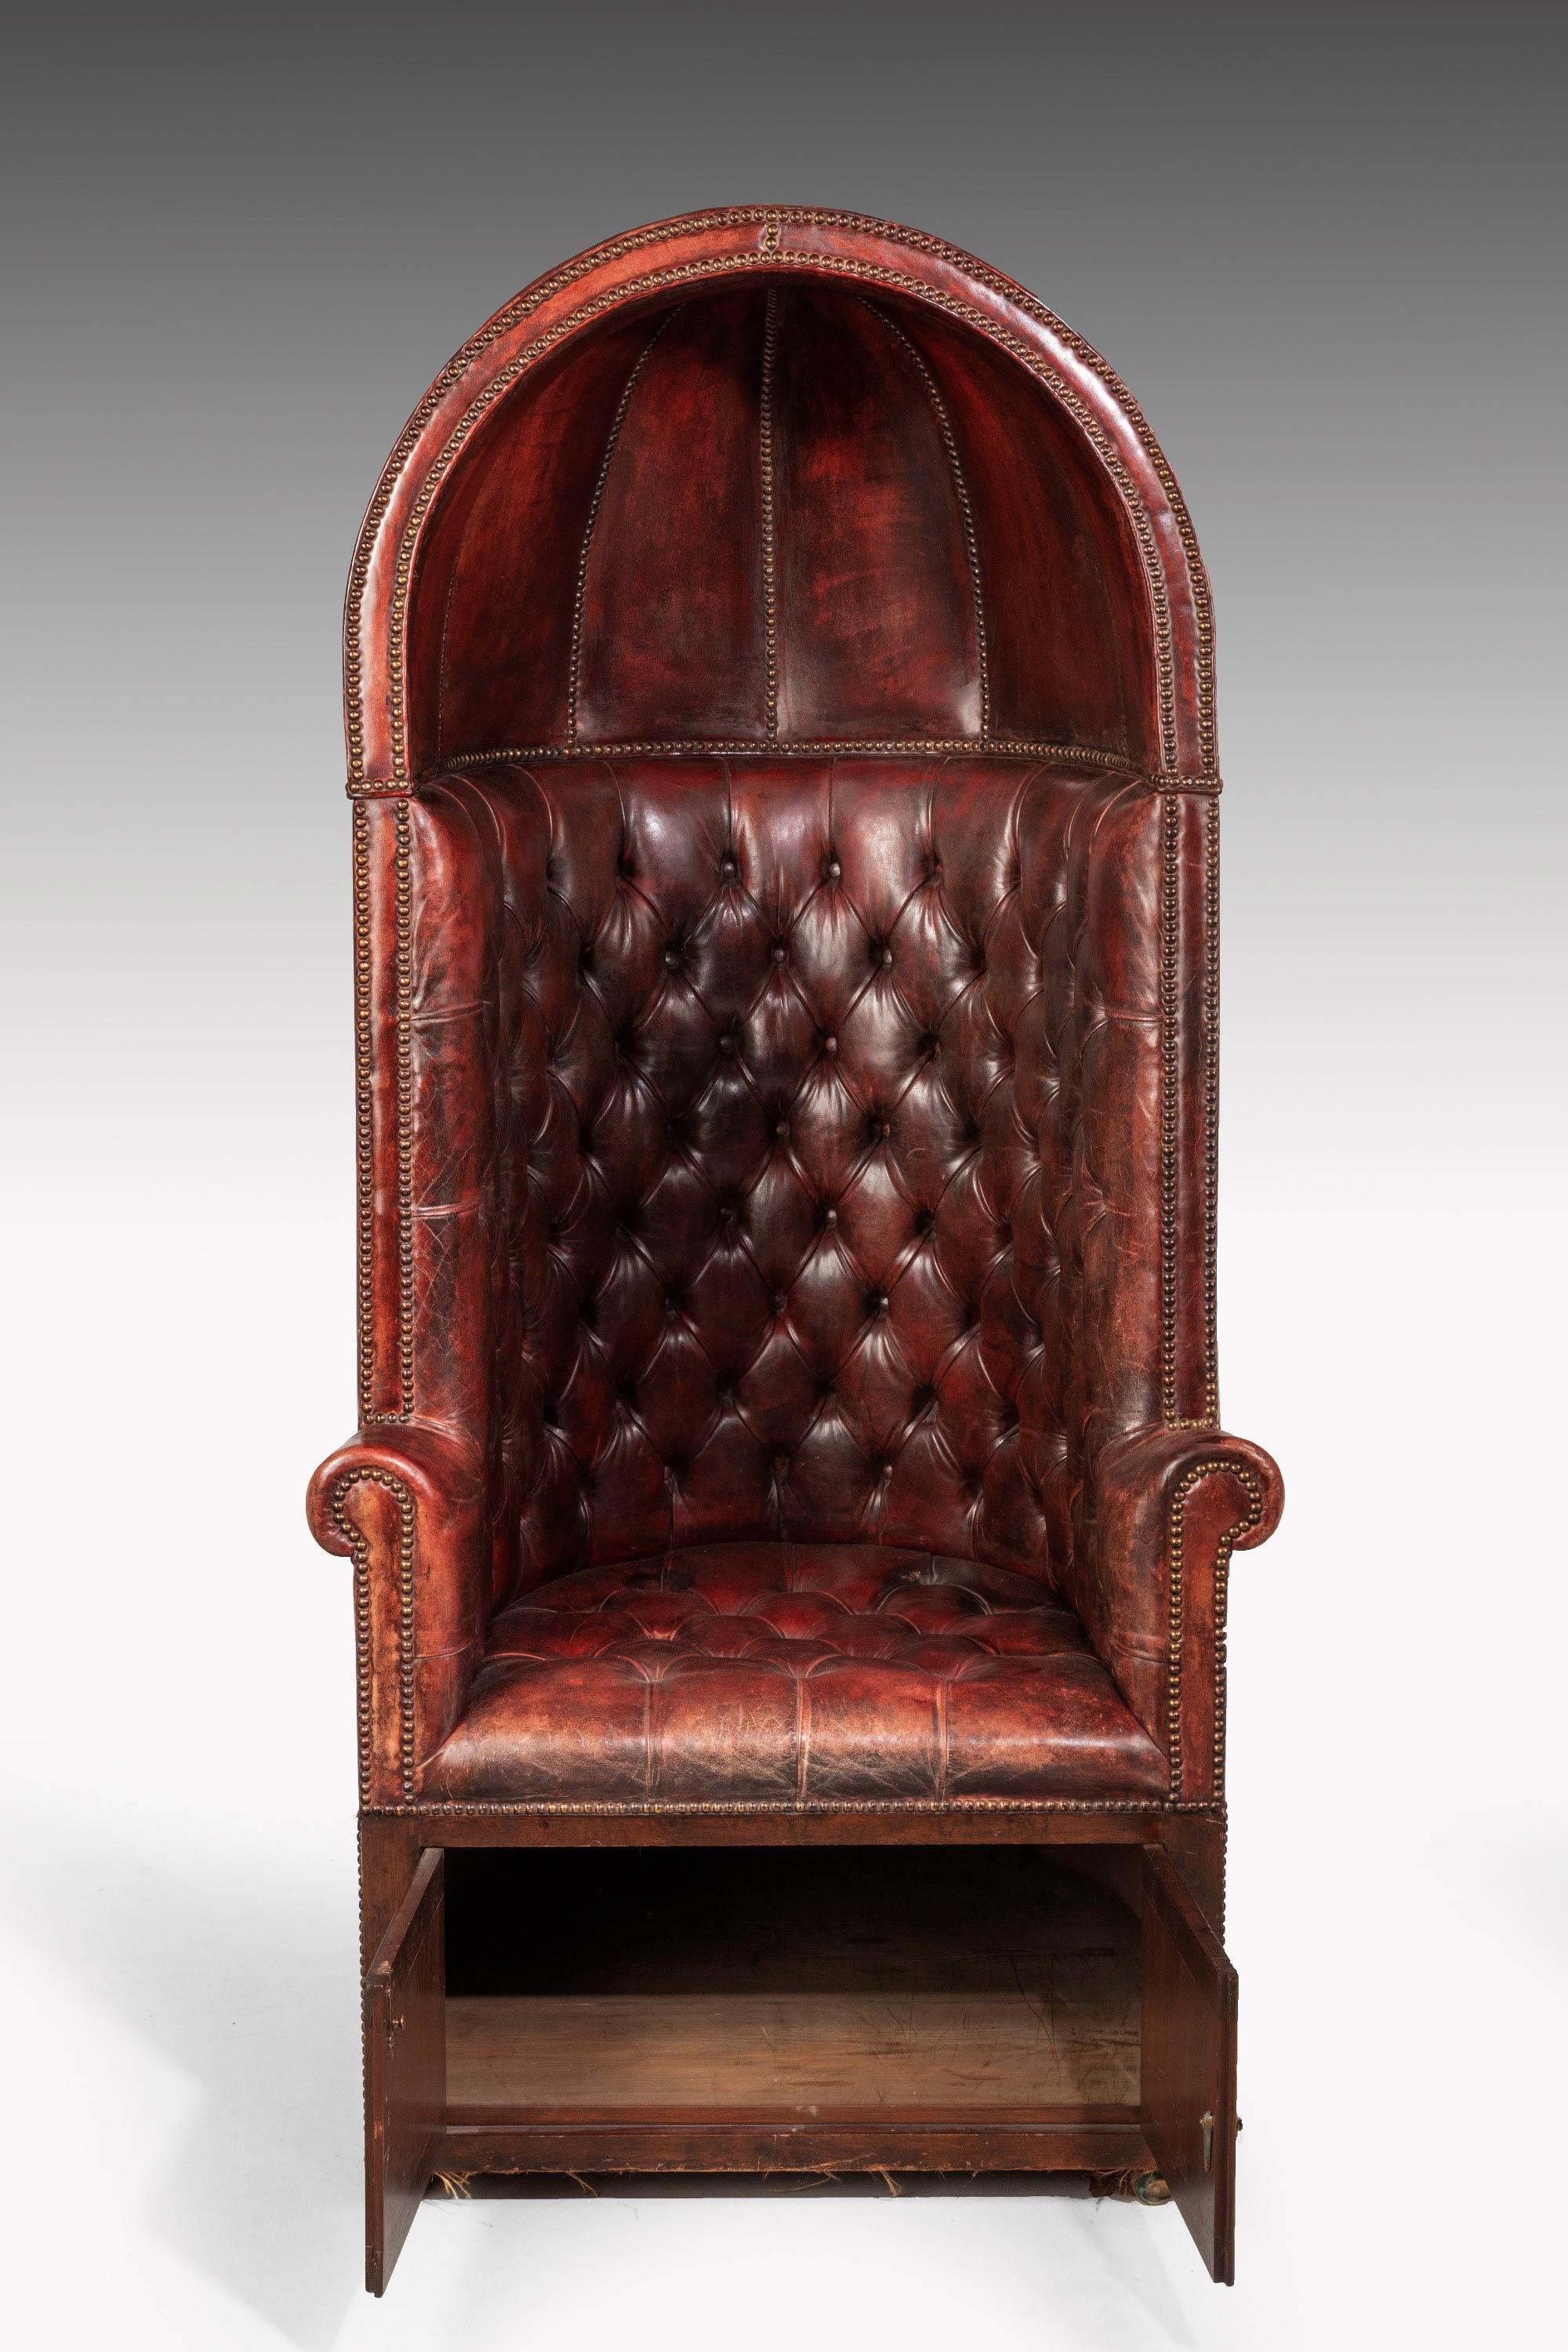 Regency Period Mahogany Framed Hall Porters Chair In Good Condition In Peterborough, Northamptonshire